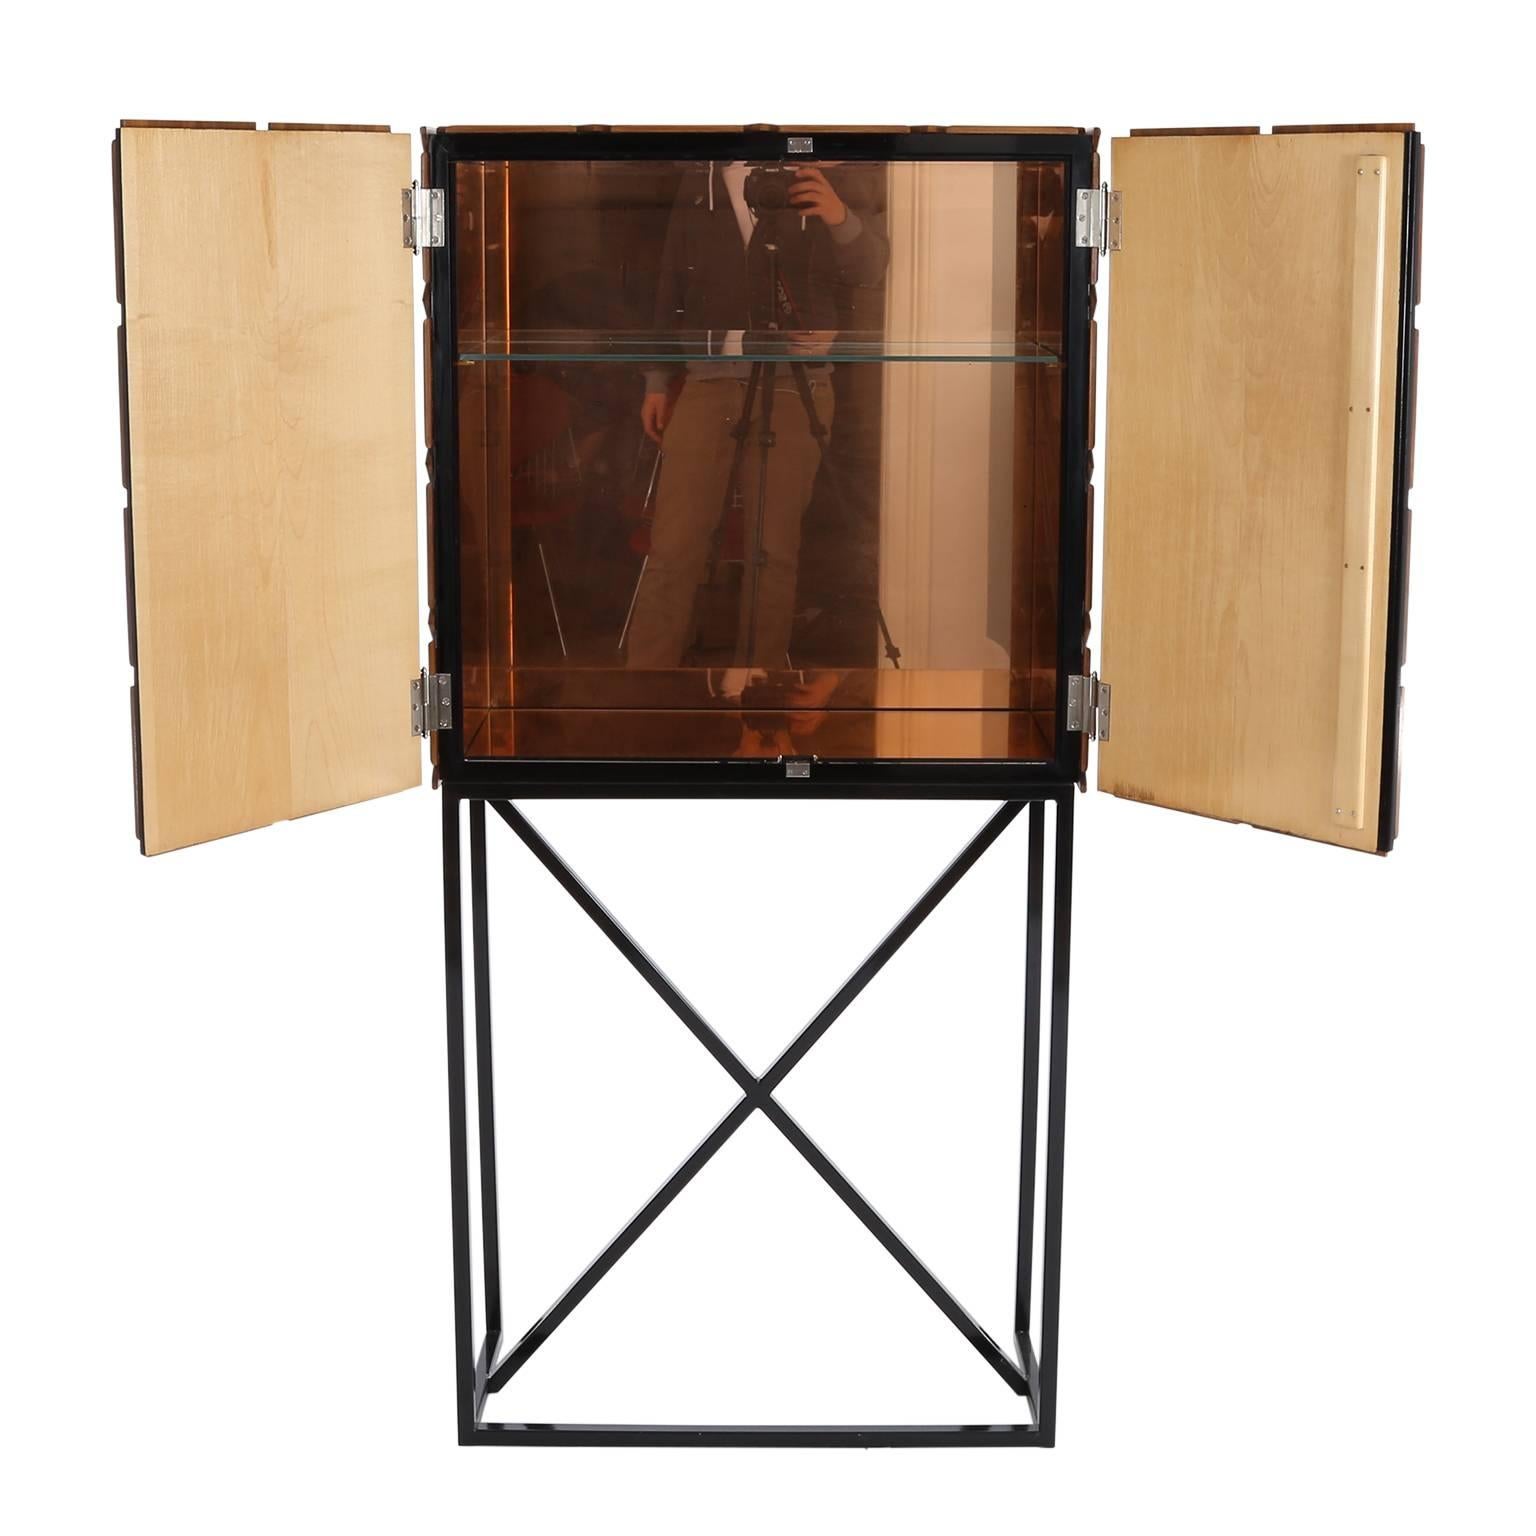 Very elegant walnut veneered Art Deco bar cabinet, which is made in France, around 1940. The cabinet has been restored and shellac polished. Interior brightly laminated with mirrored walls and glass shelf. On a modern black lacquered stand.
     